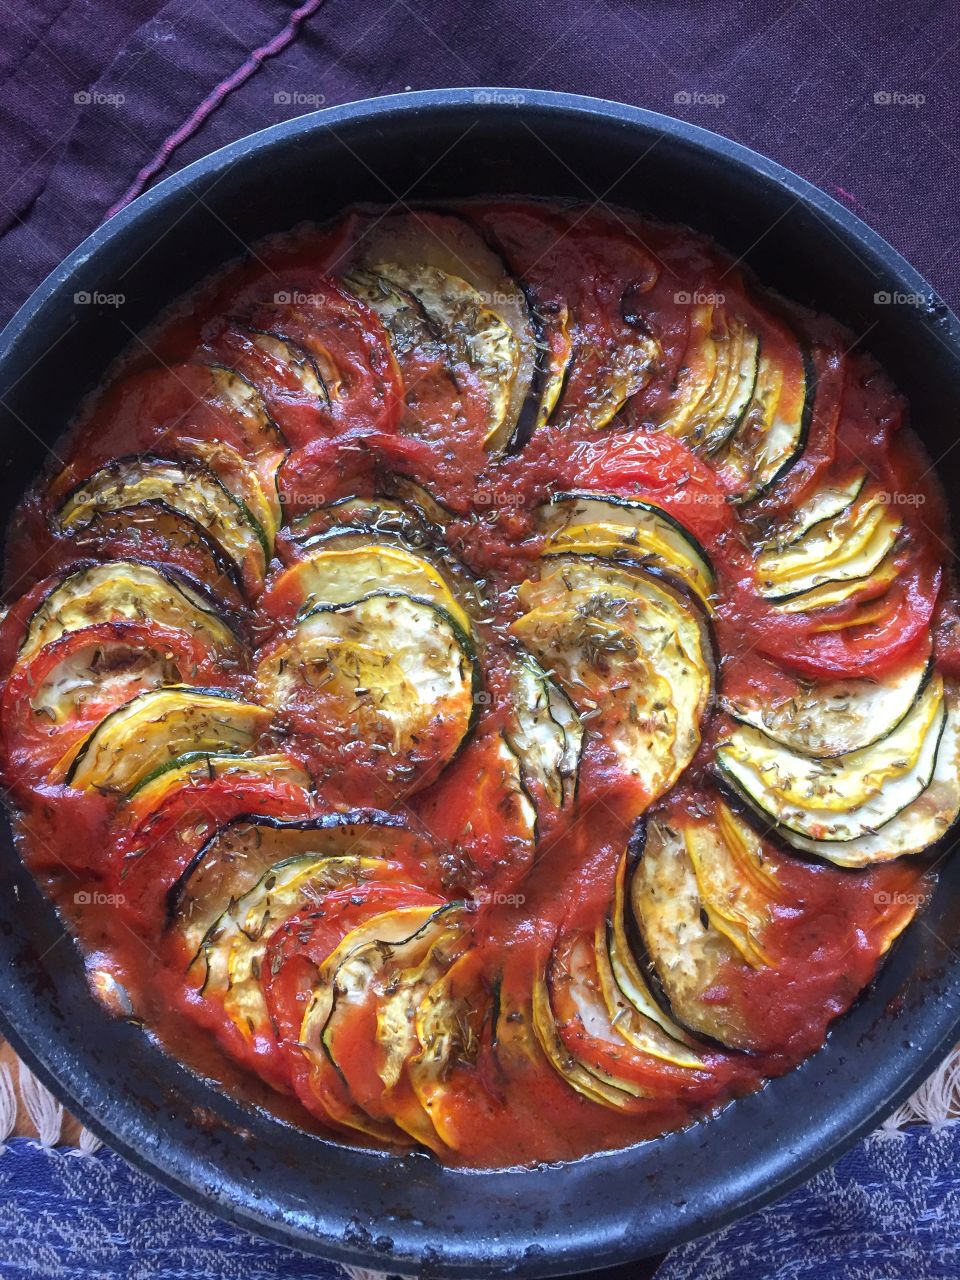 Ratatouille in the oven❤️
Spicy tomato sauce in the pan❤️ add sliced yellow, green squash, tomatoes and zucchini. Season with oregano, thyme, basil, yeast flakes, salt and pepper❤️ 45 min in the oven at 45 min